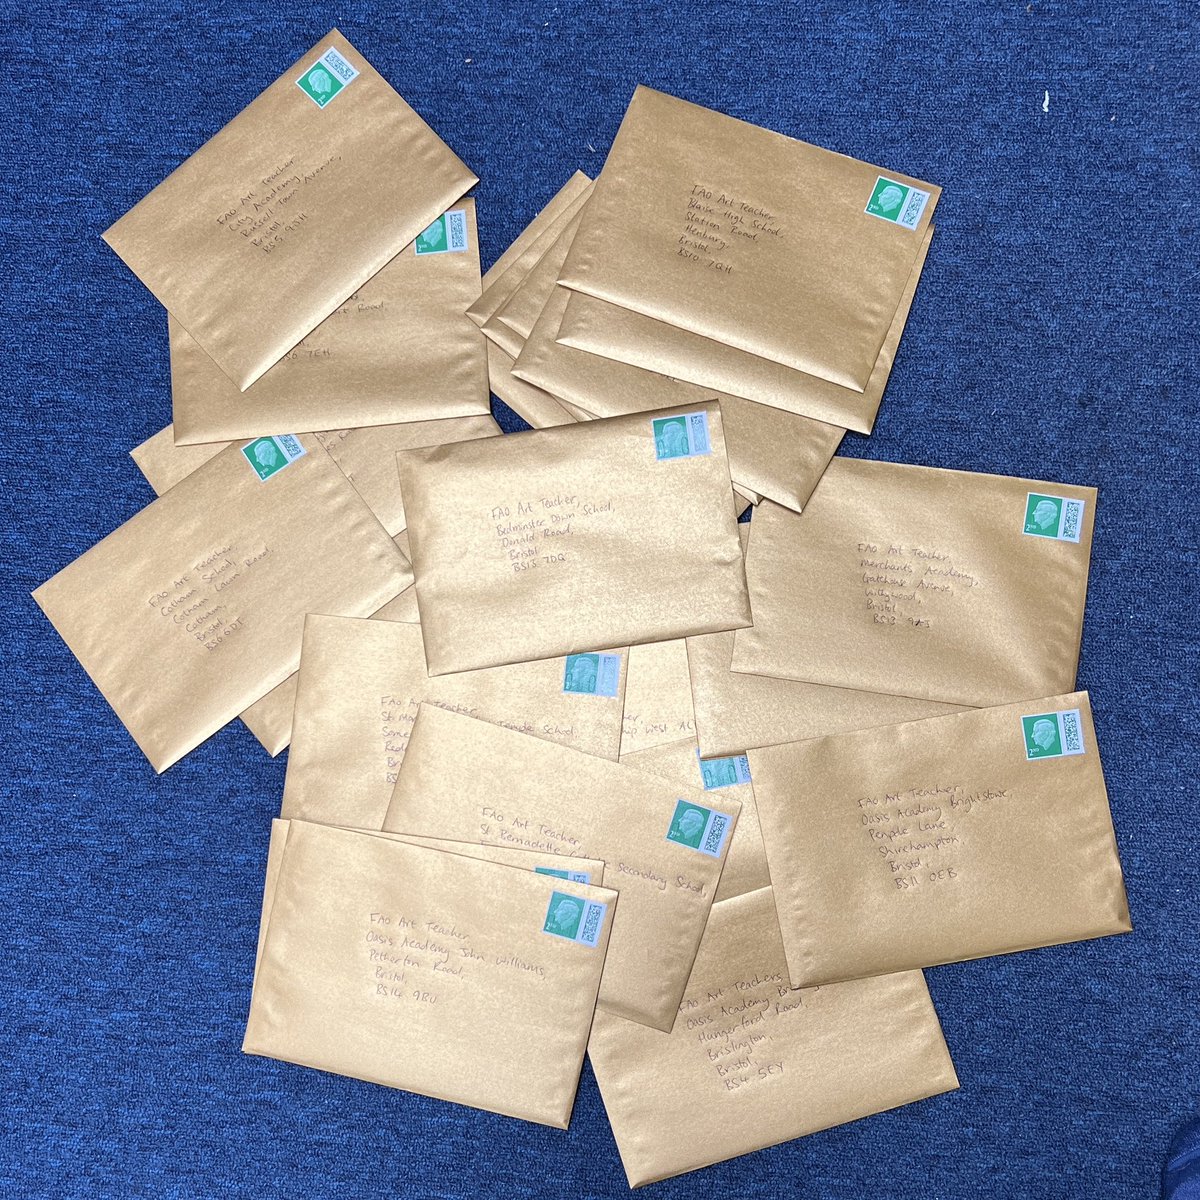 Golden letters ! Posting out to schools asking art teachers to apply for BristolSchoolArtsFund - giving them funds for school trips, materials, equipment, visiting artists, murals etc. lukejerram.com/charitable_wor…